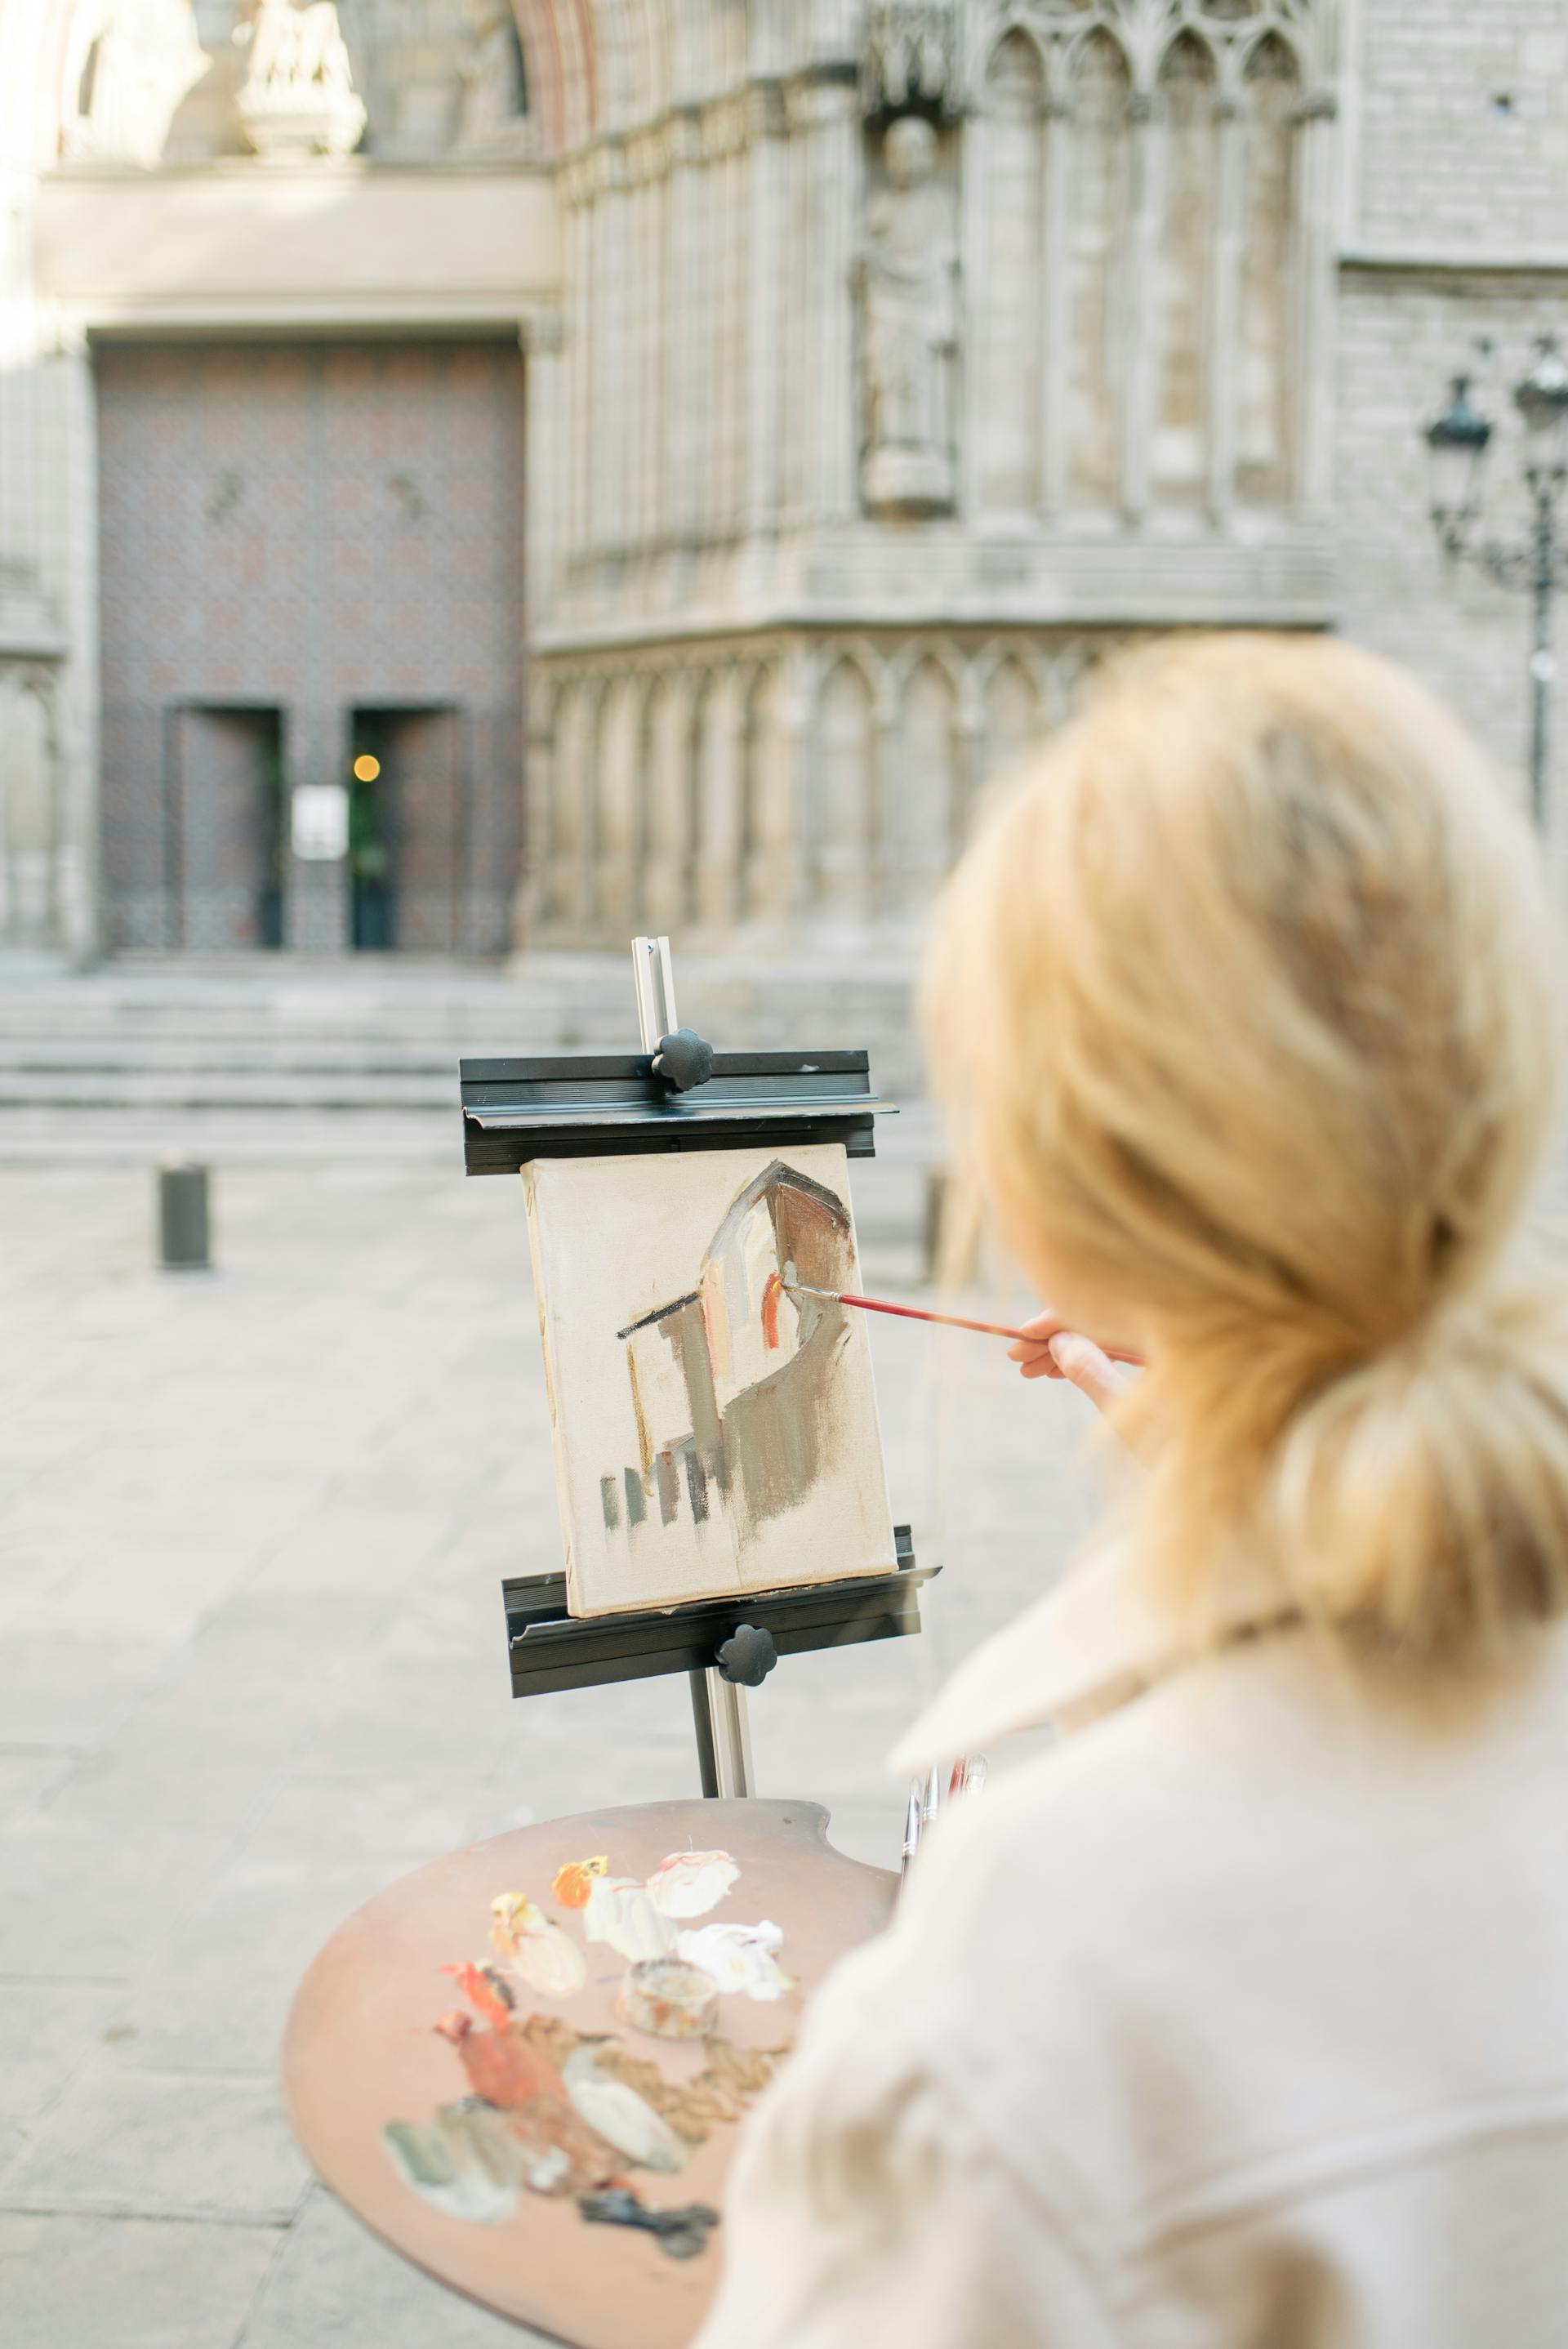 Woman painting a cathedral | Source: Pexels